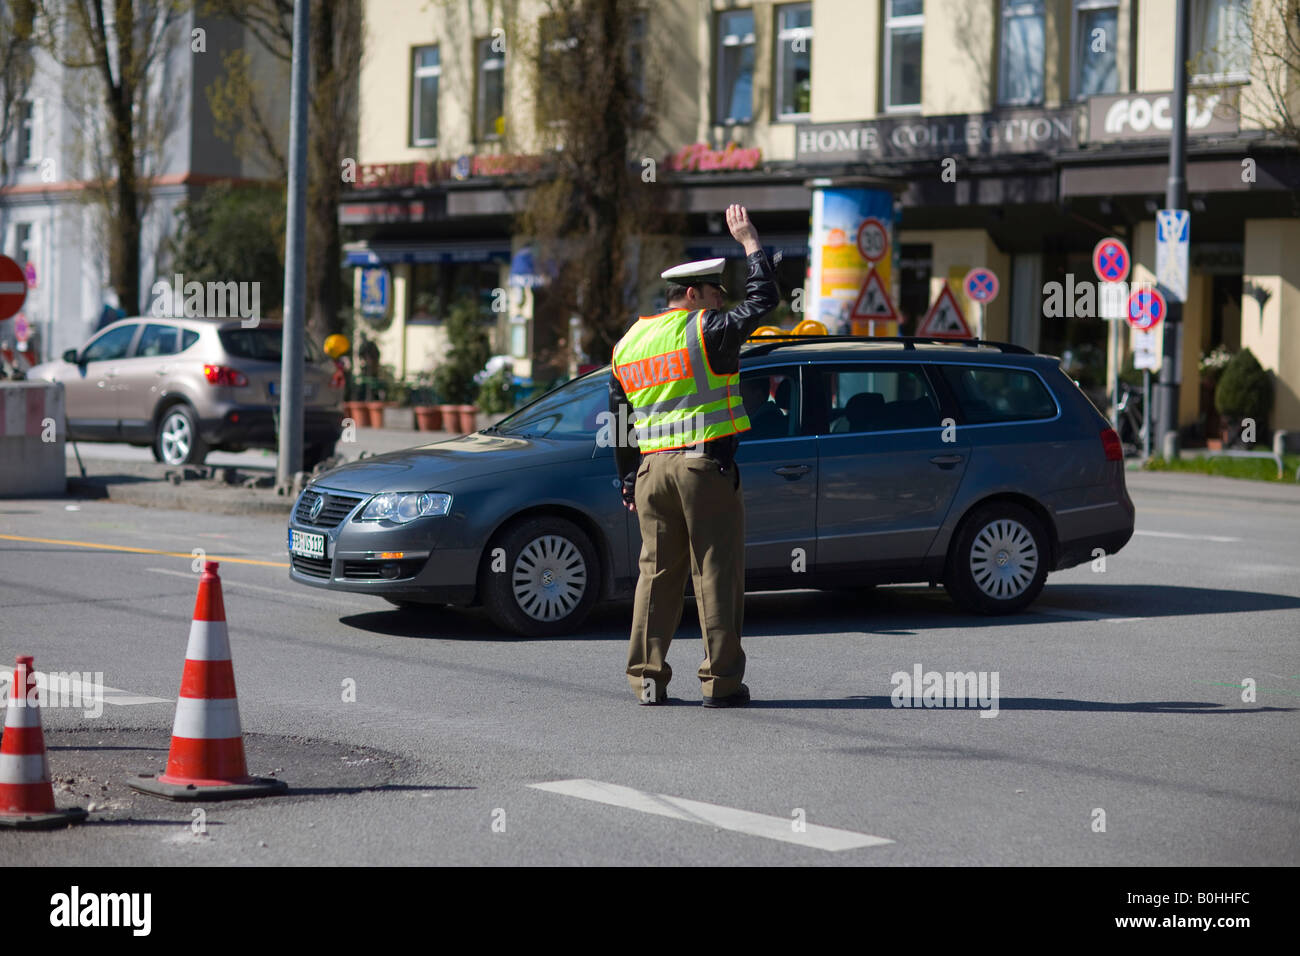 Policeman, police officer directing traffic, Munich, Bavaria, Germany Stock Photo